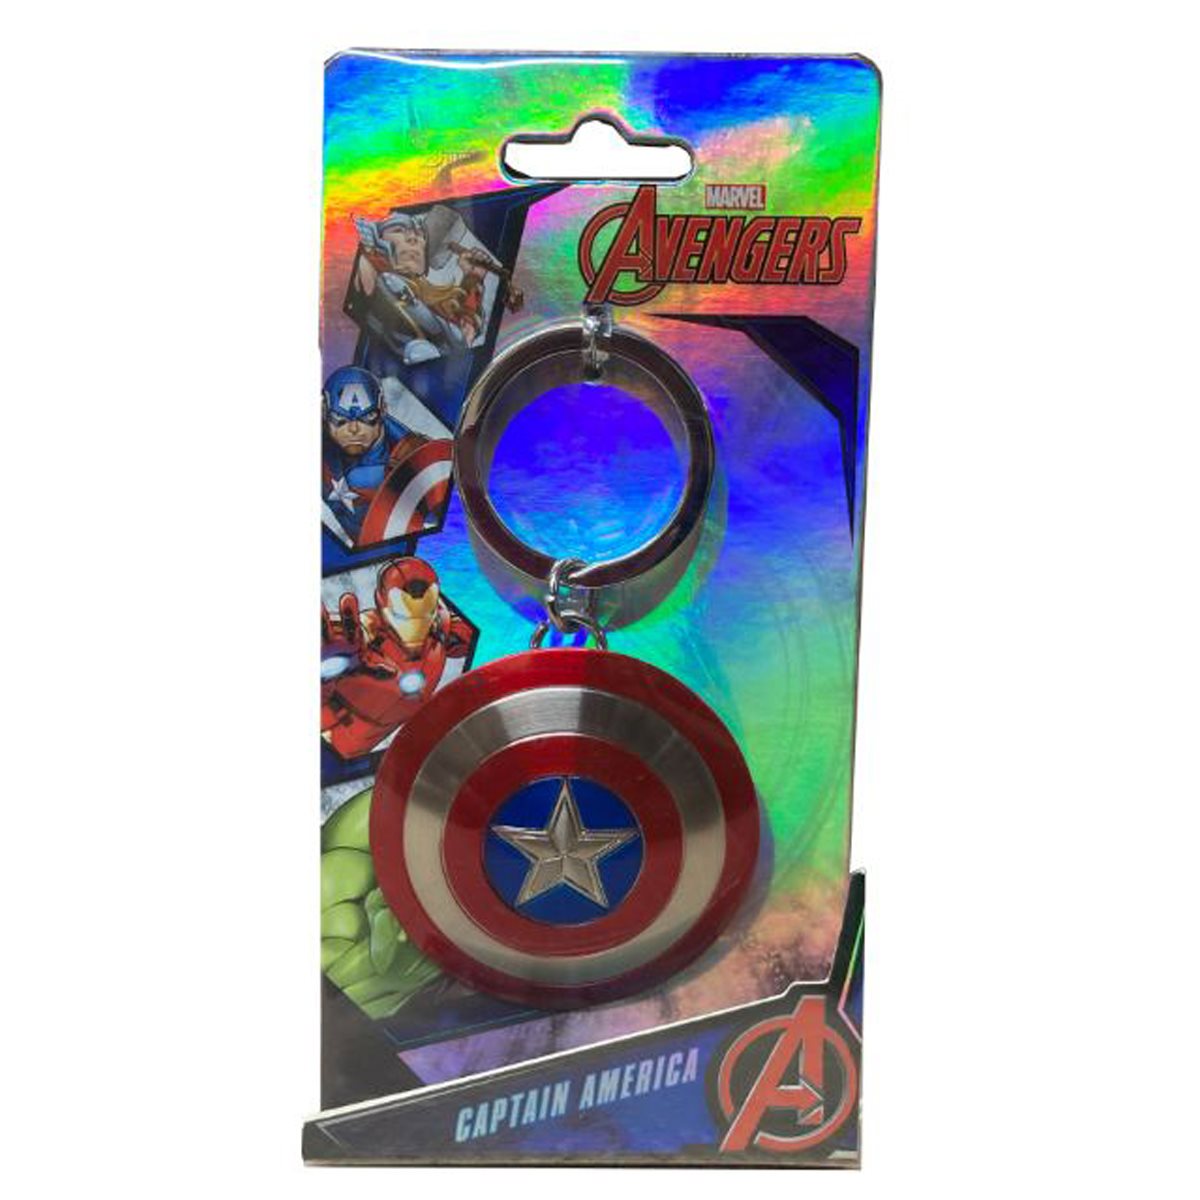 Captain America Avengers Keychain KeyRing Marval New Age of Ultron Shield 